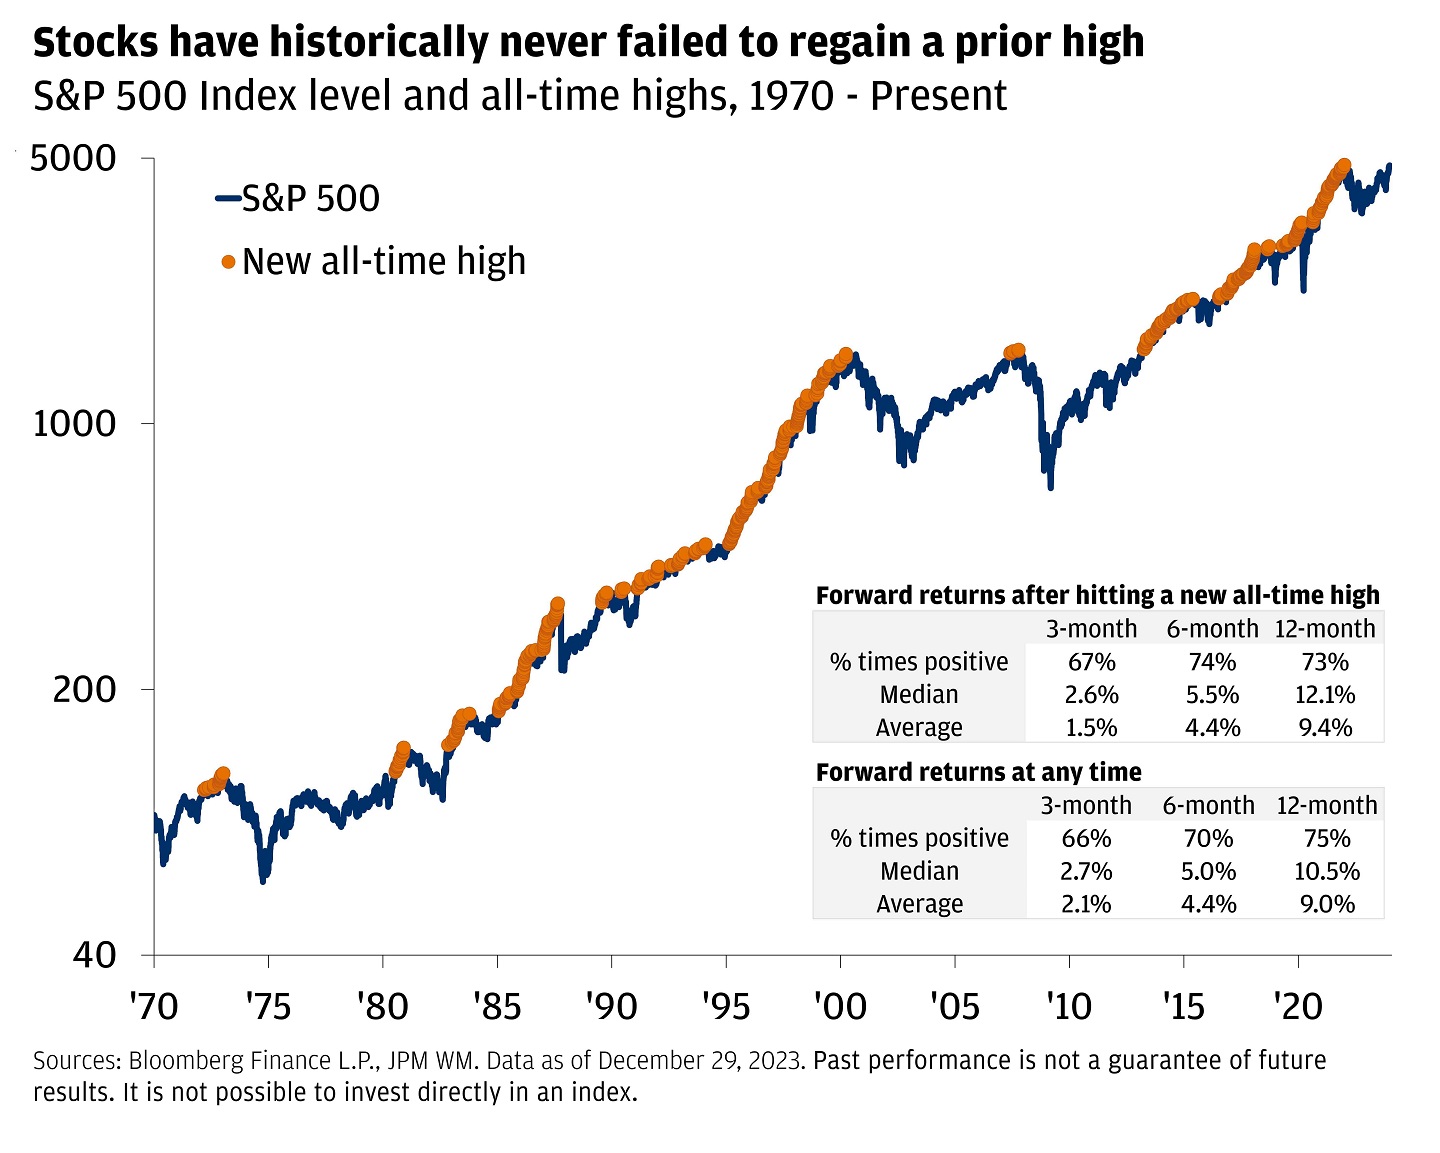 The chart describes the S&P 500 index level and all-time highs.